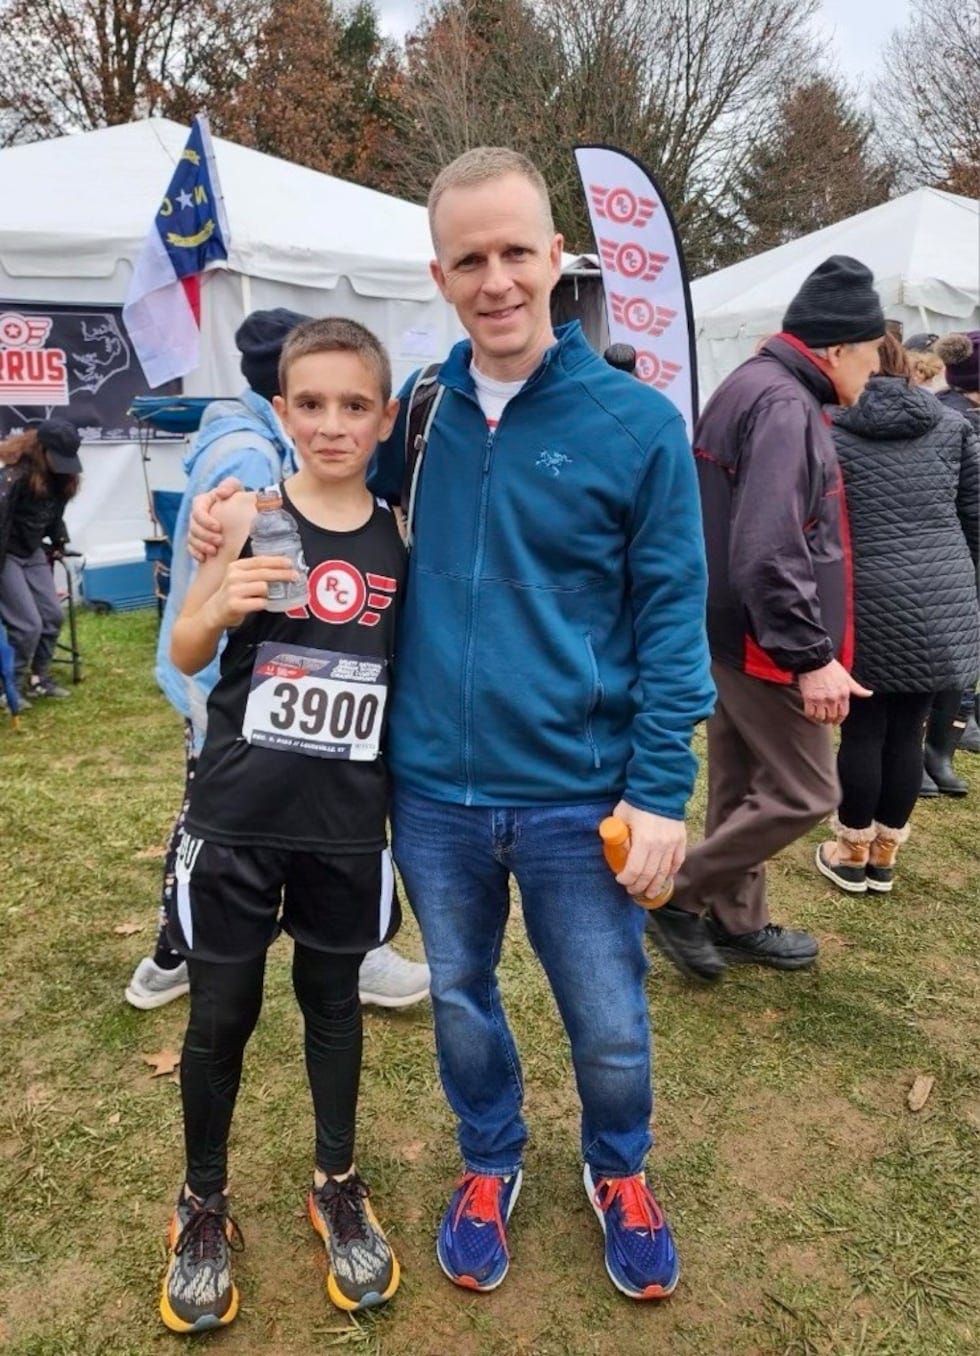 Justin Parmenter and his son who inspired him to step back into running.